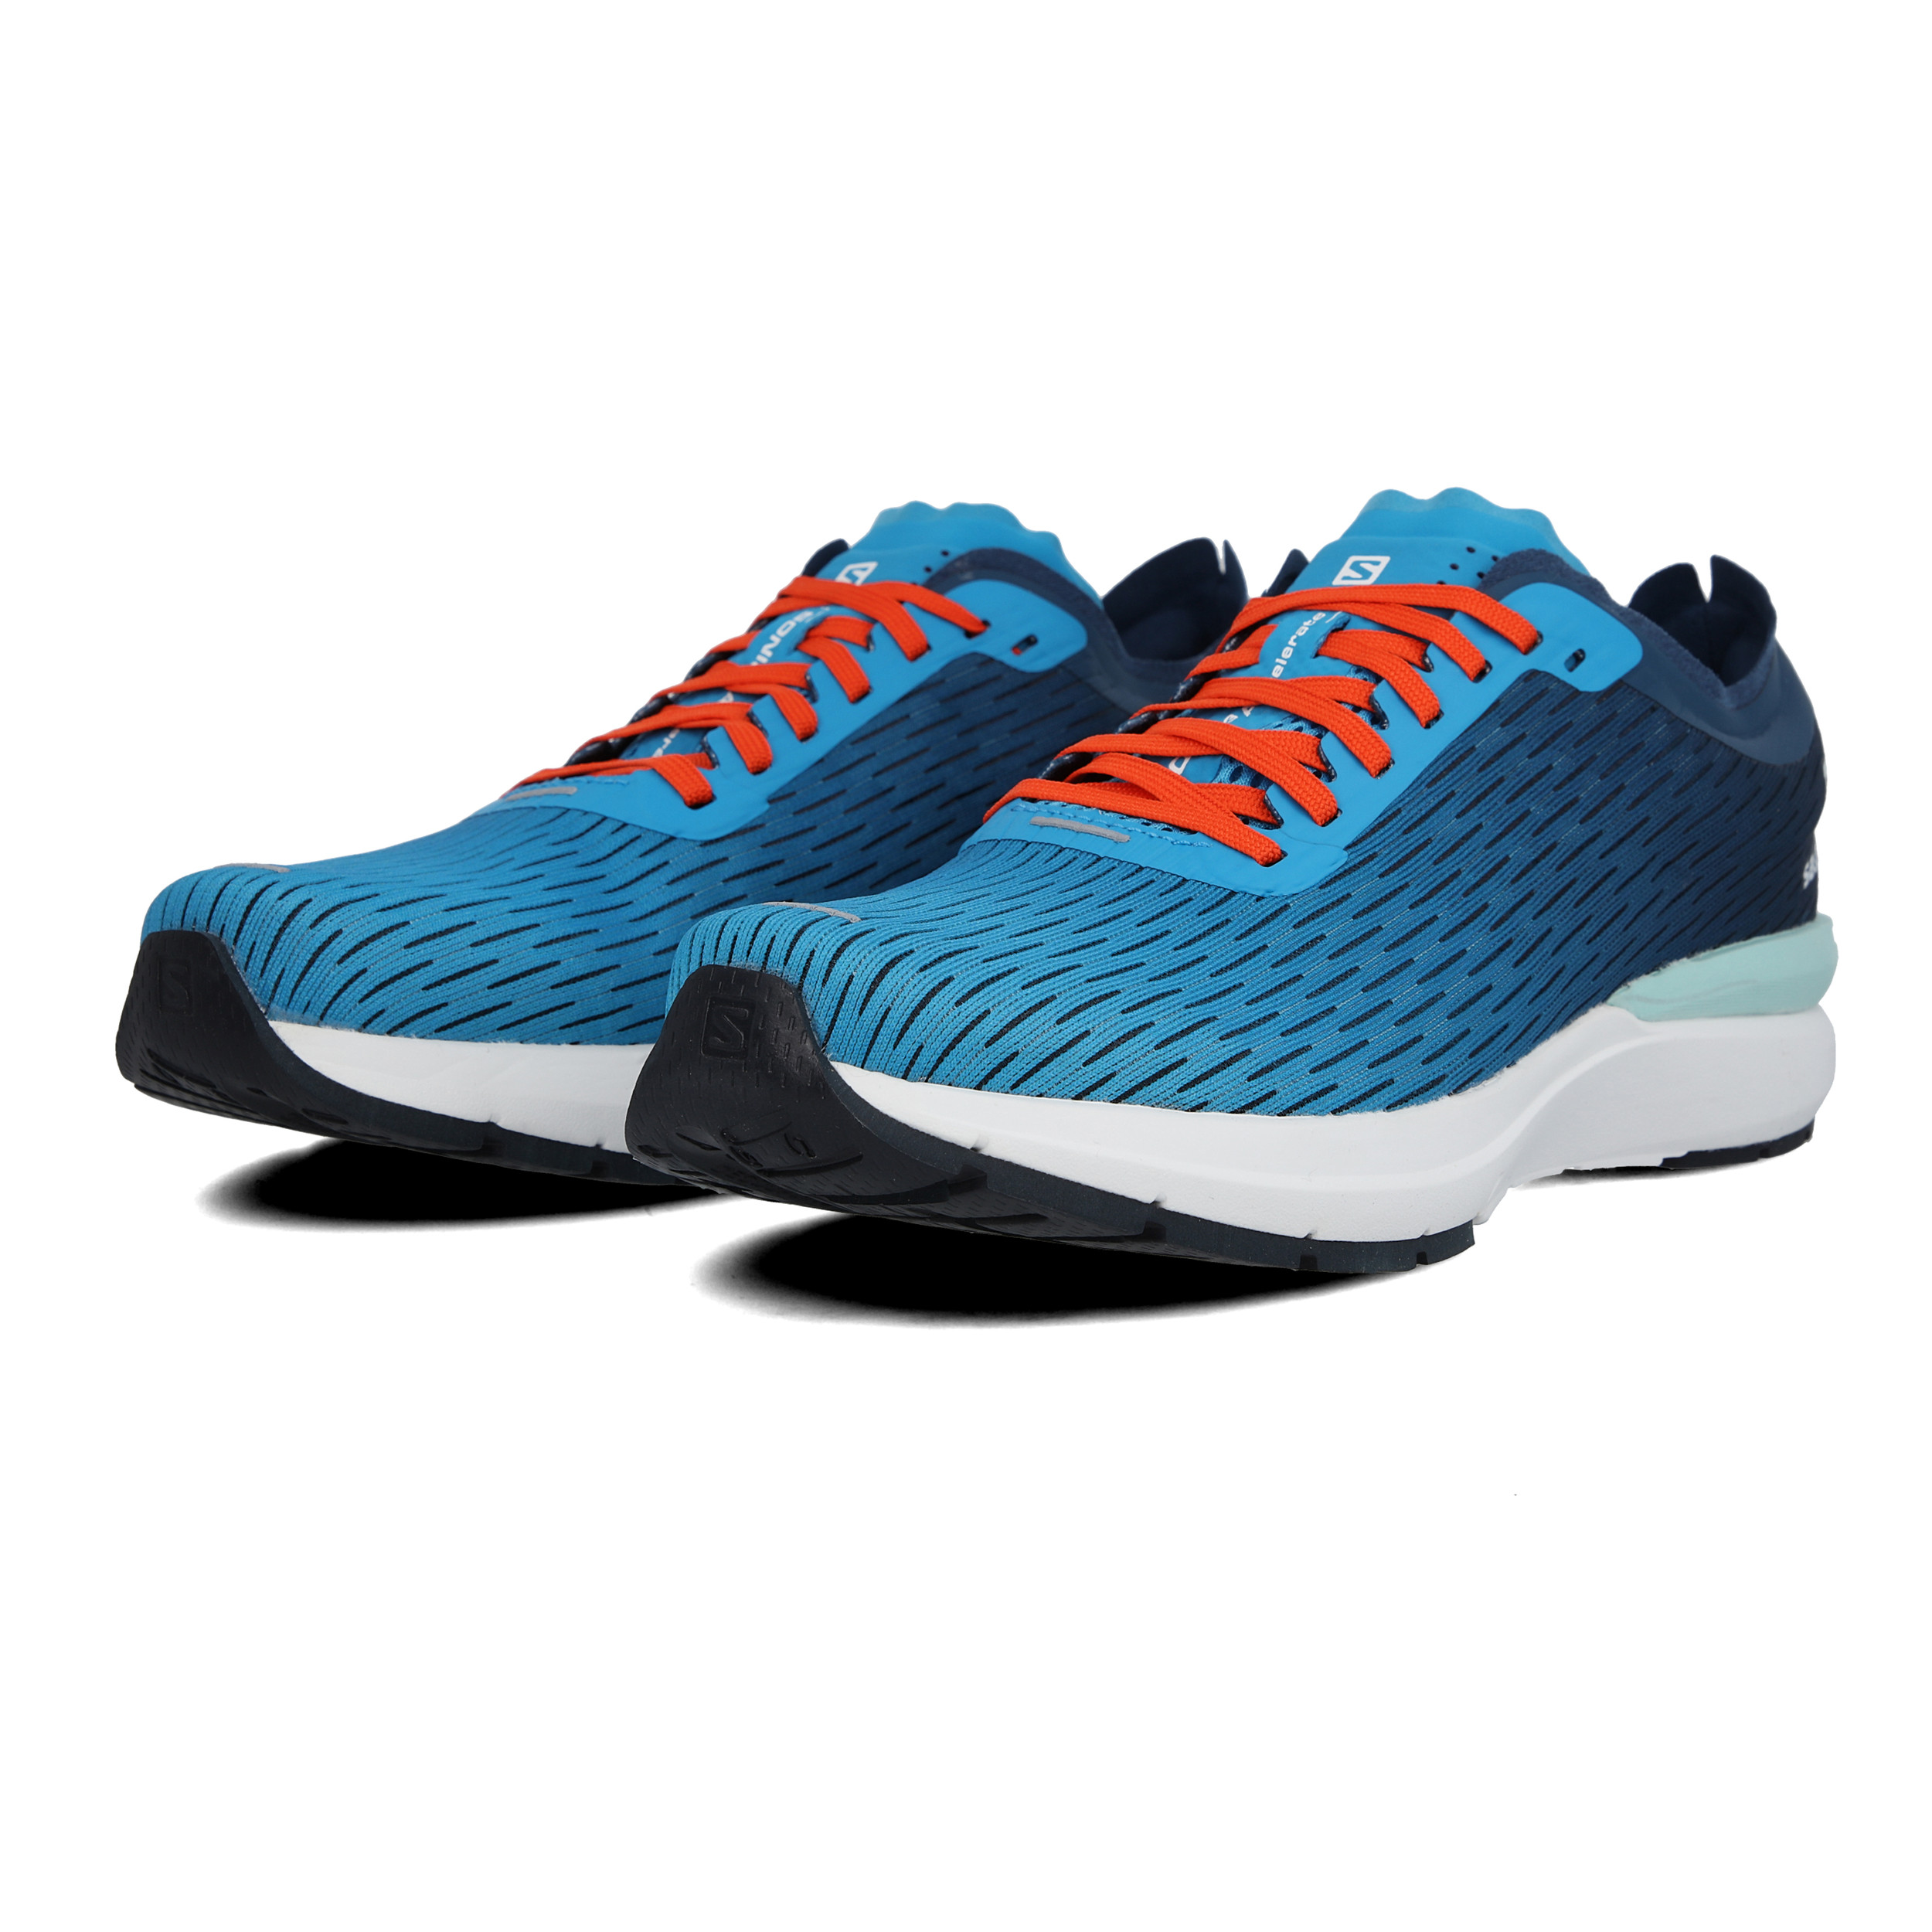 Salomon Sonic 3 Accelerate Running Shoes - AW20